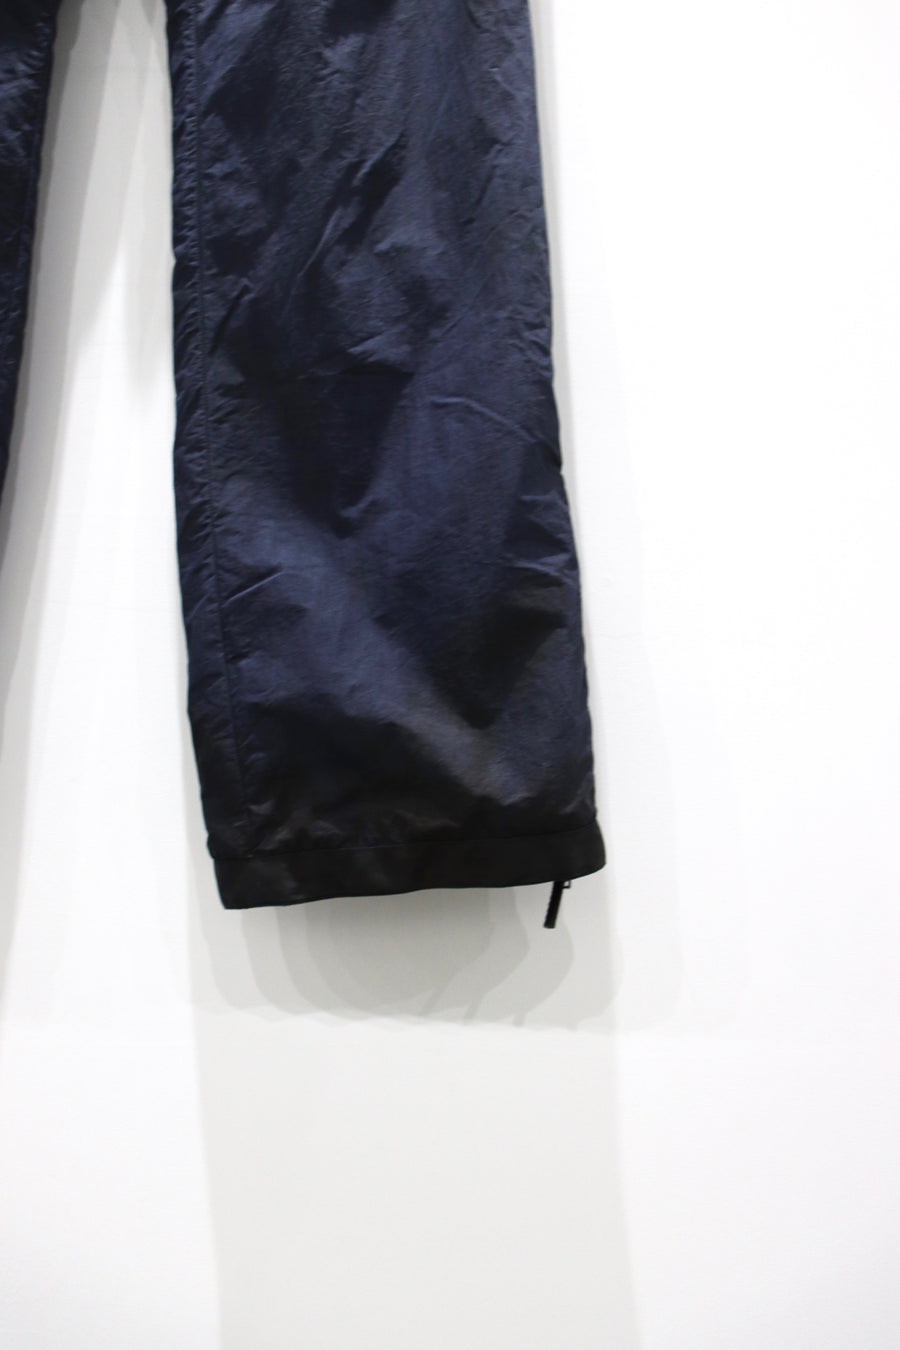 NULABEL  NATURAL DYED PADDED TROUSERS